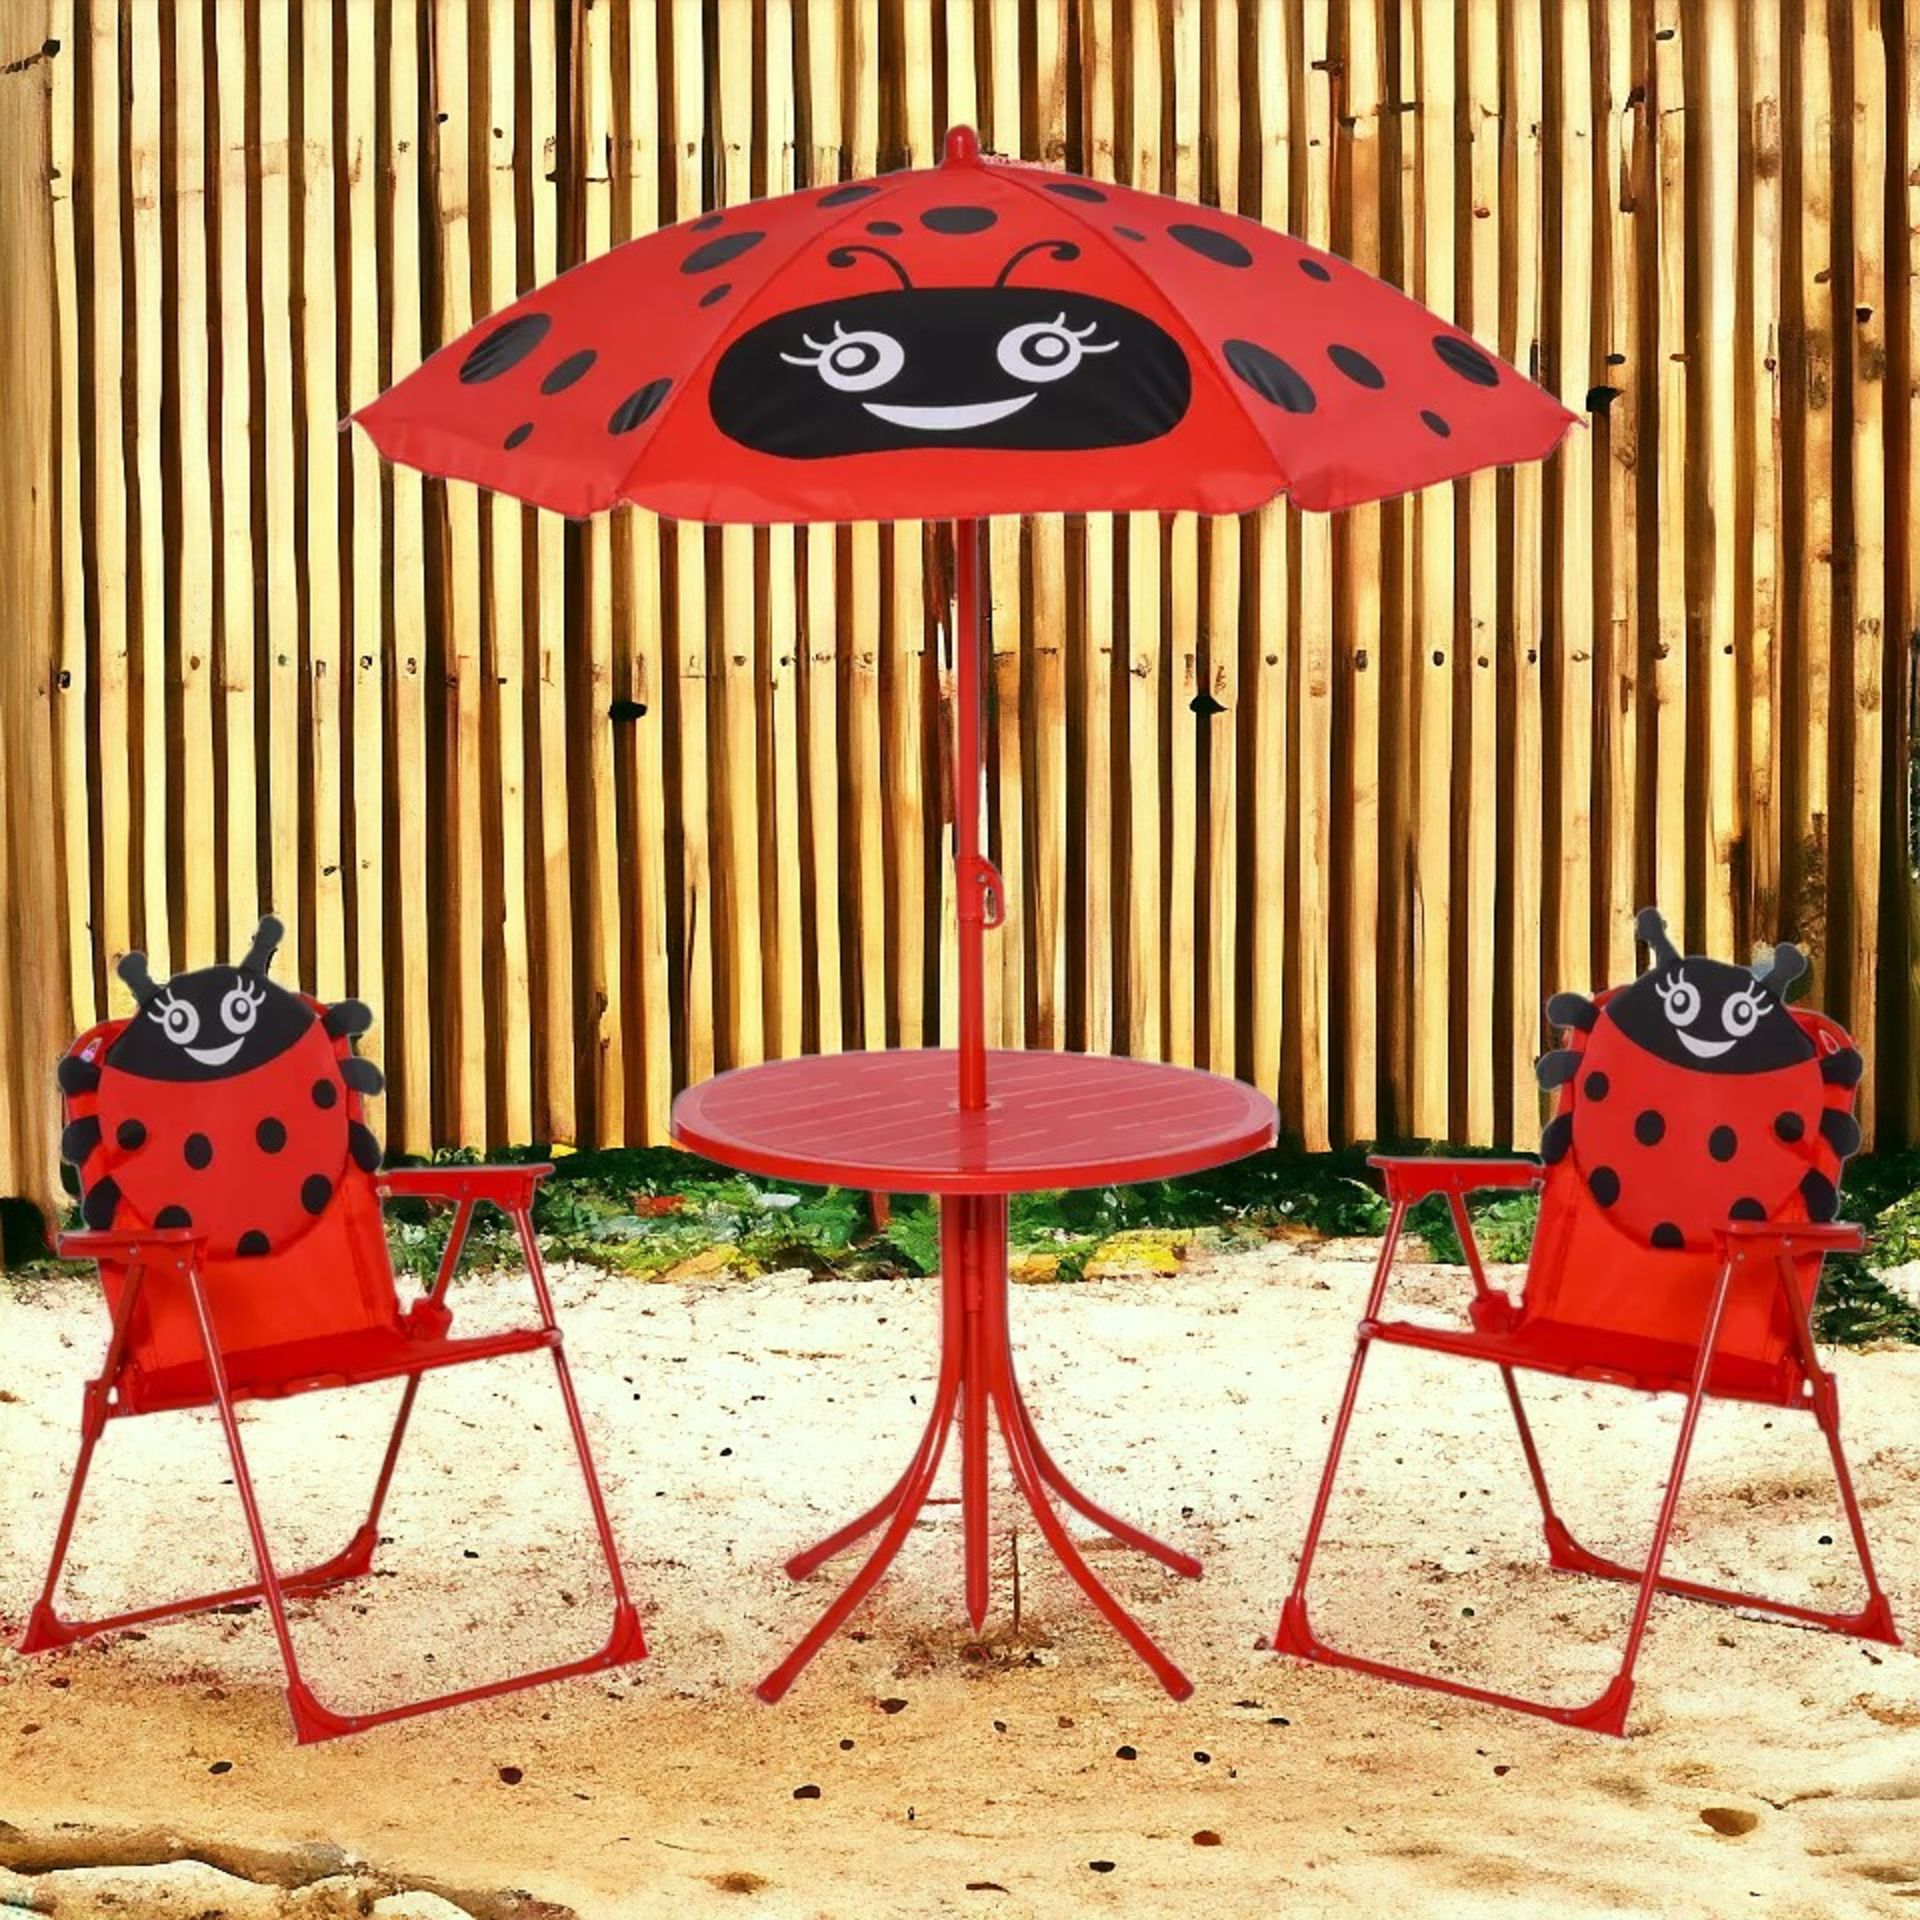 FREE DELIVERY- BRAND NEW KIDS FOLDING PICNIC TABLE CHAIR SET LADYBUG PATTERN OUTDOOR